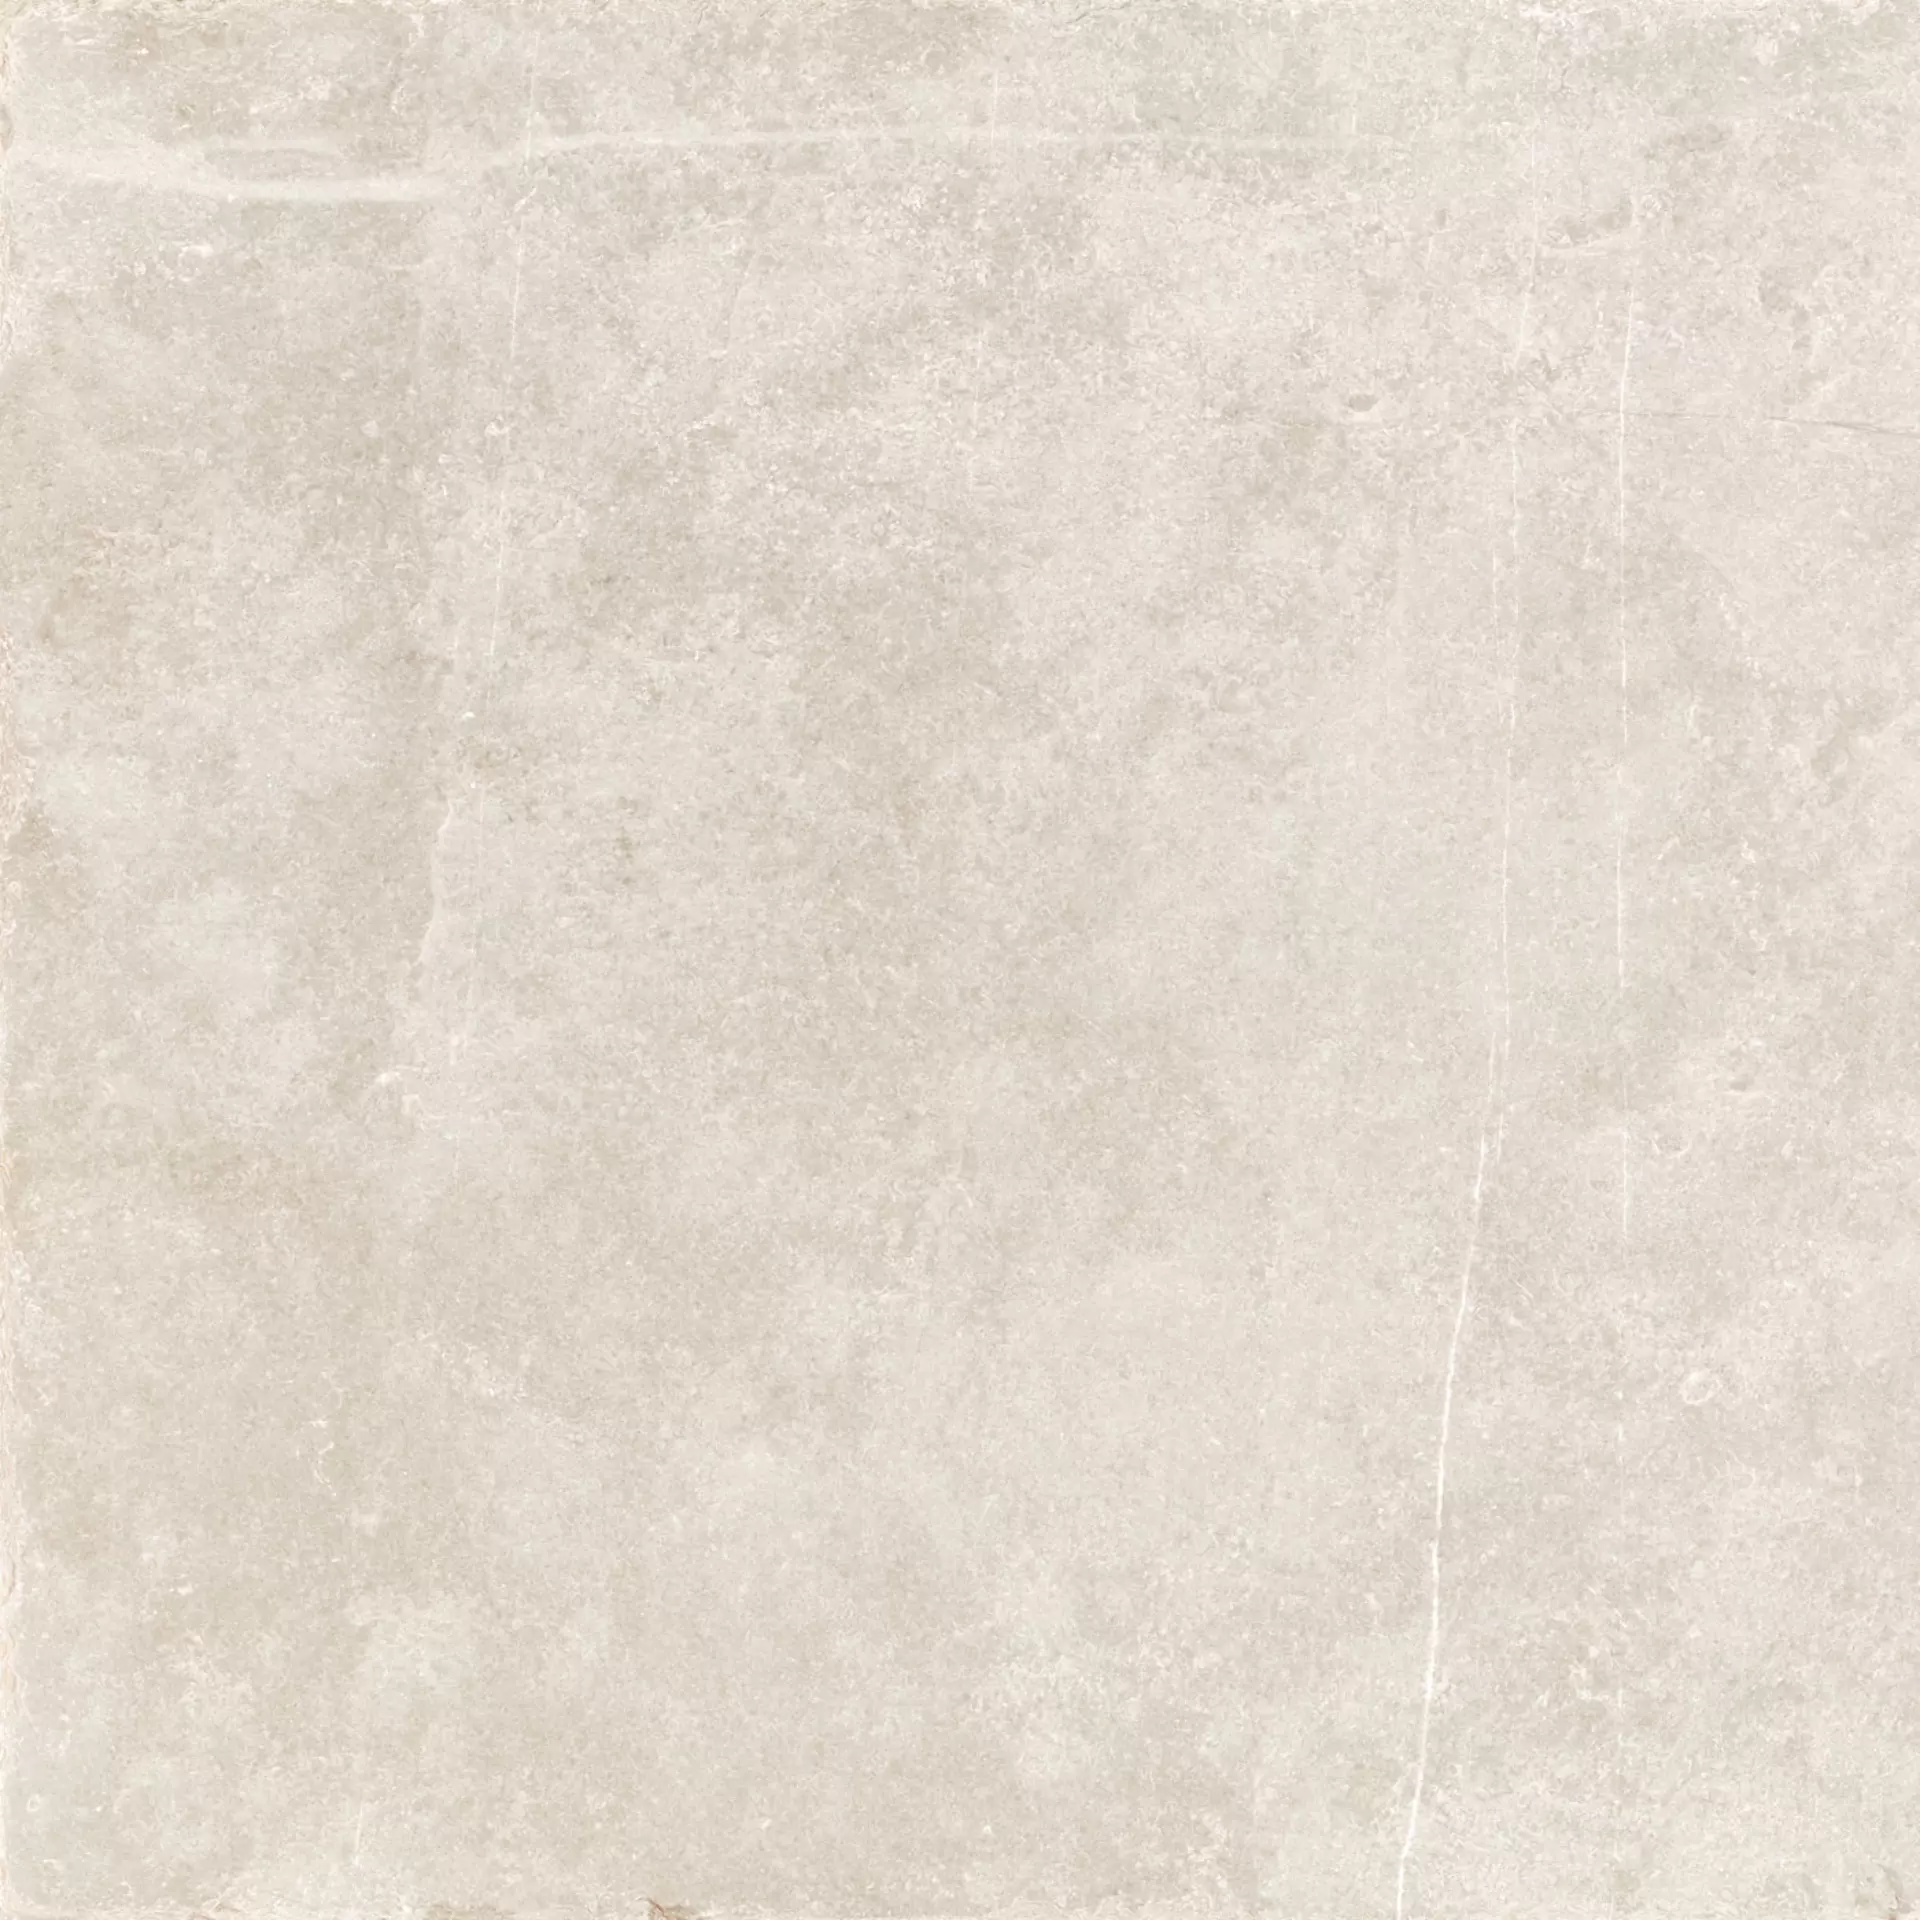 Provenza Groove Hot White Naturale E364 80x80cm rectified 9,5mm